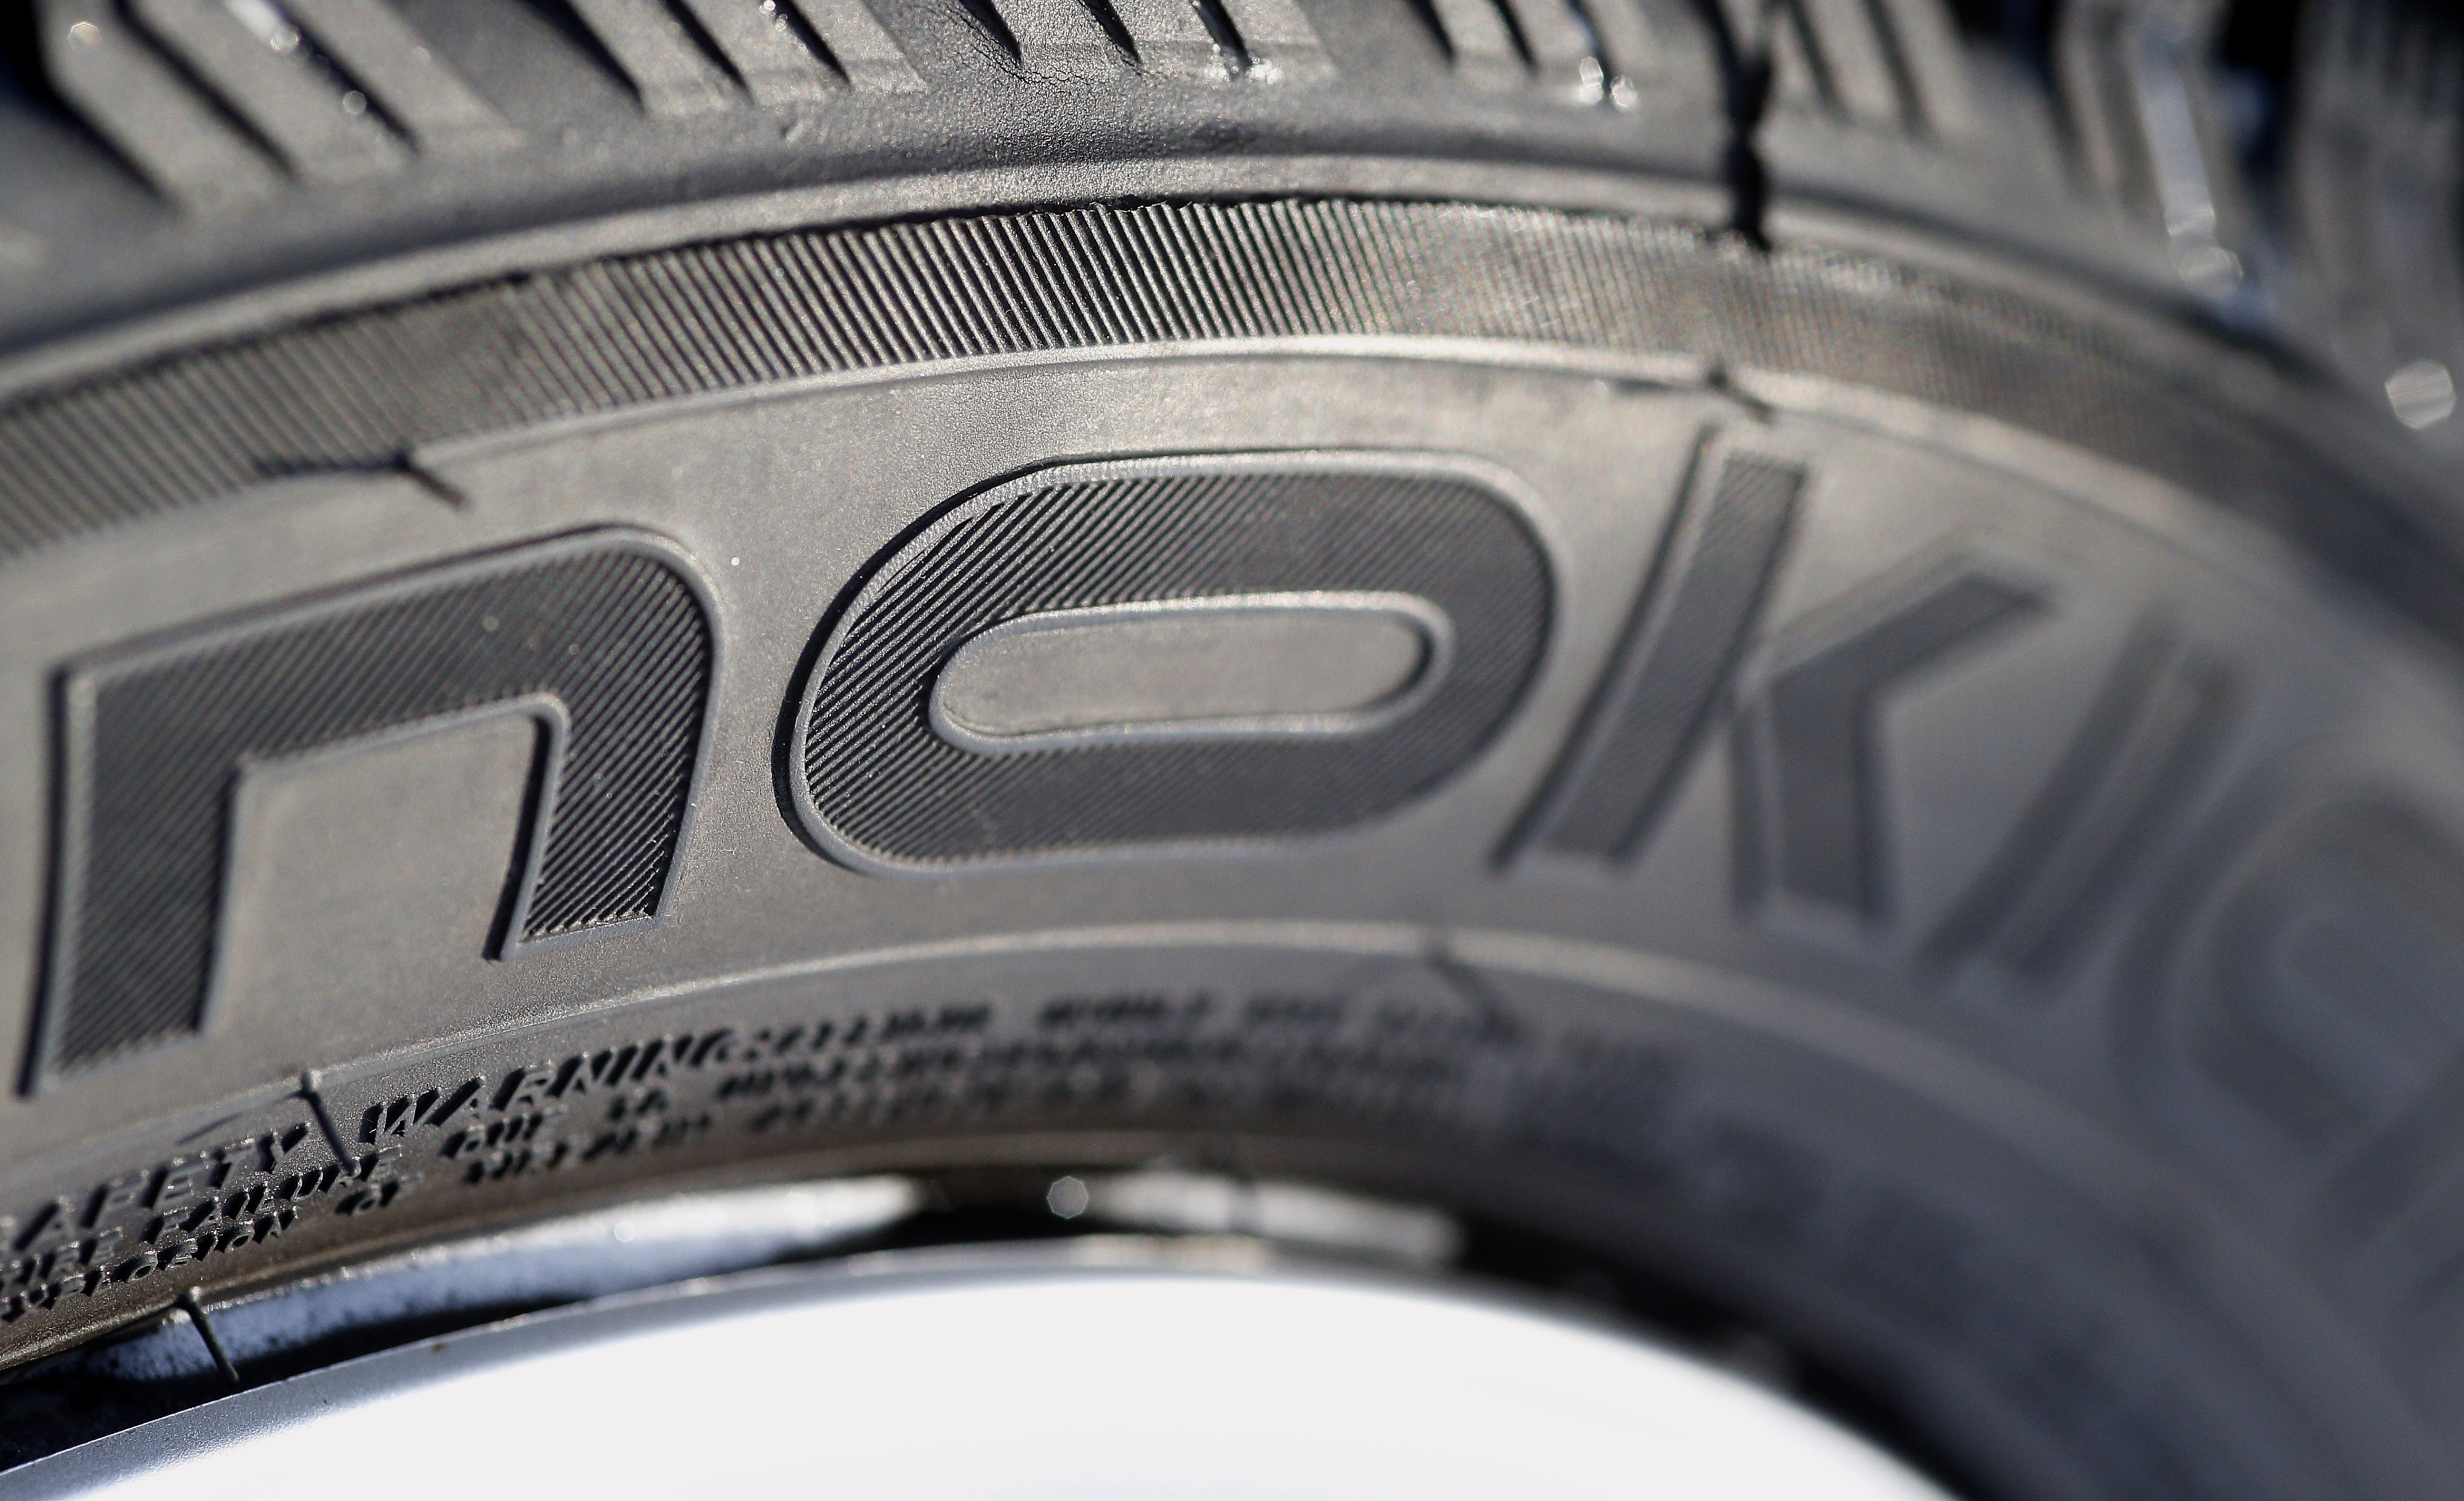 Nokian Tires: New sanctions "significant effect" Russian operations